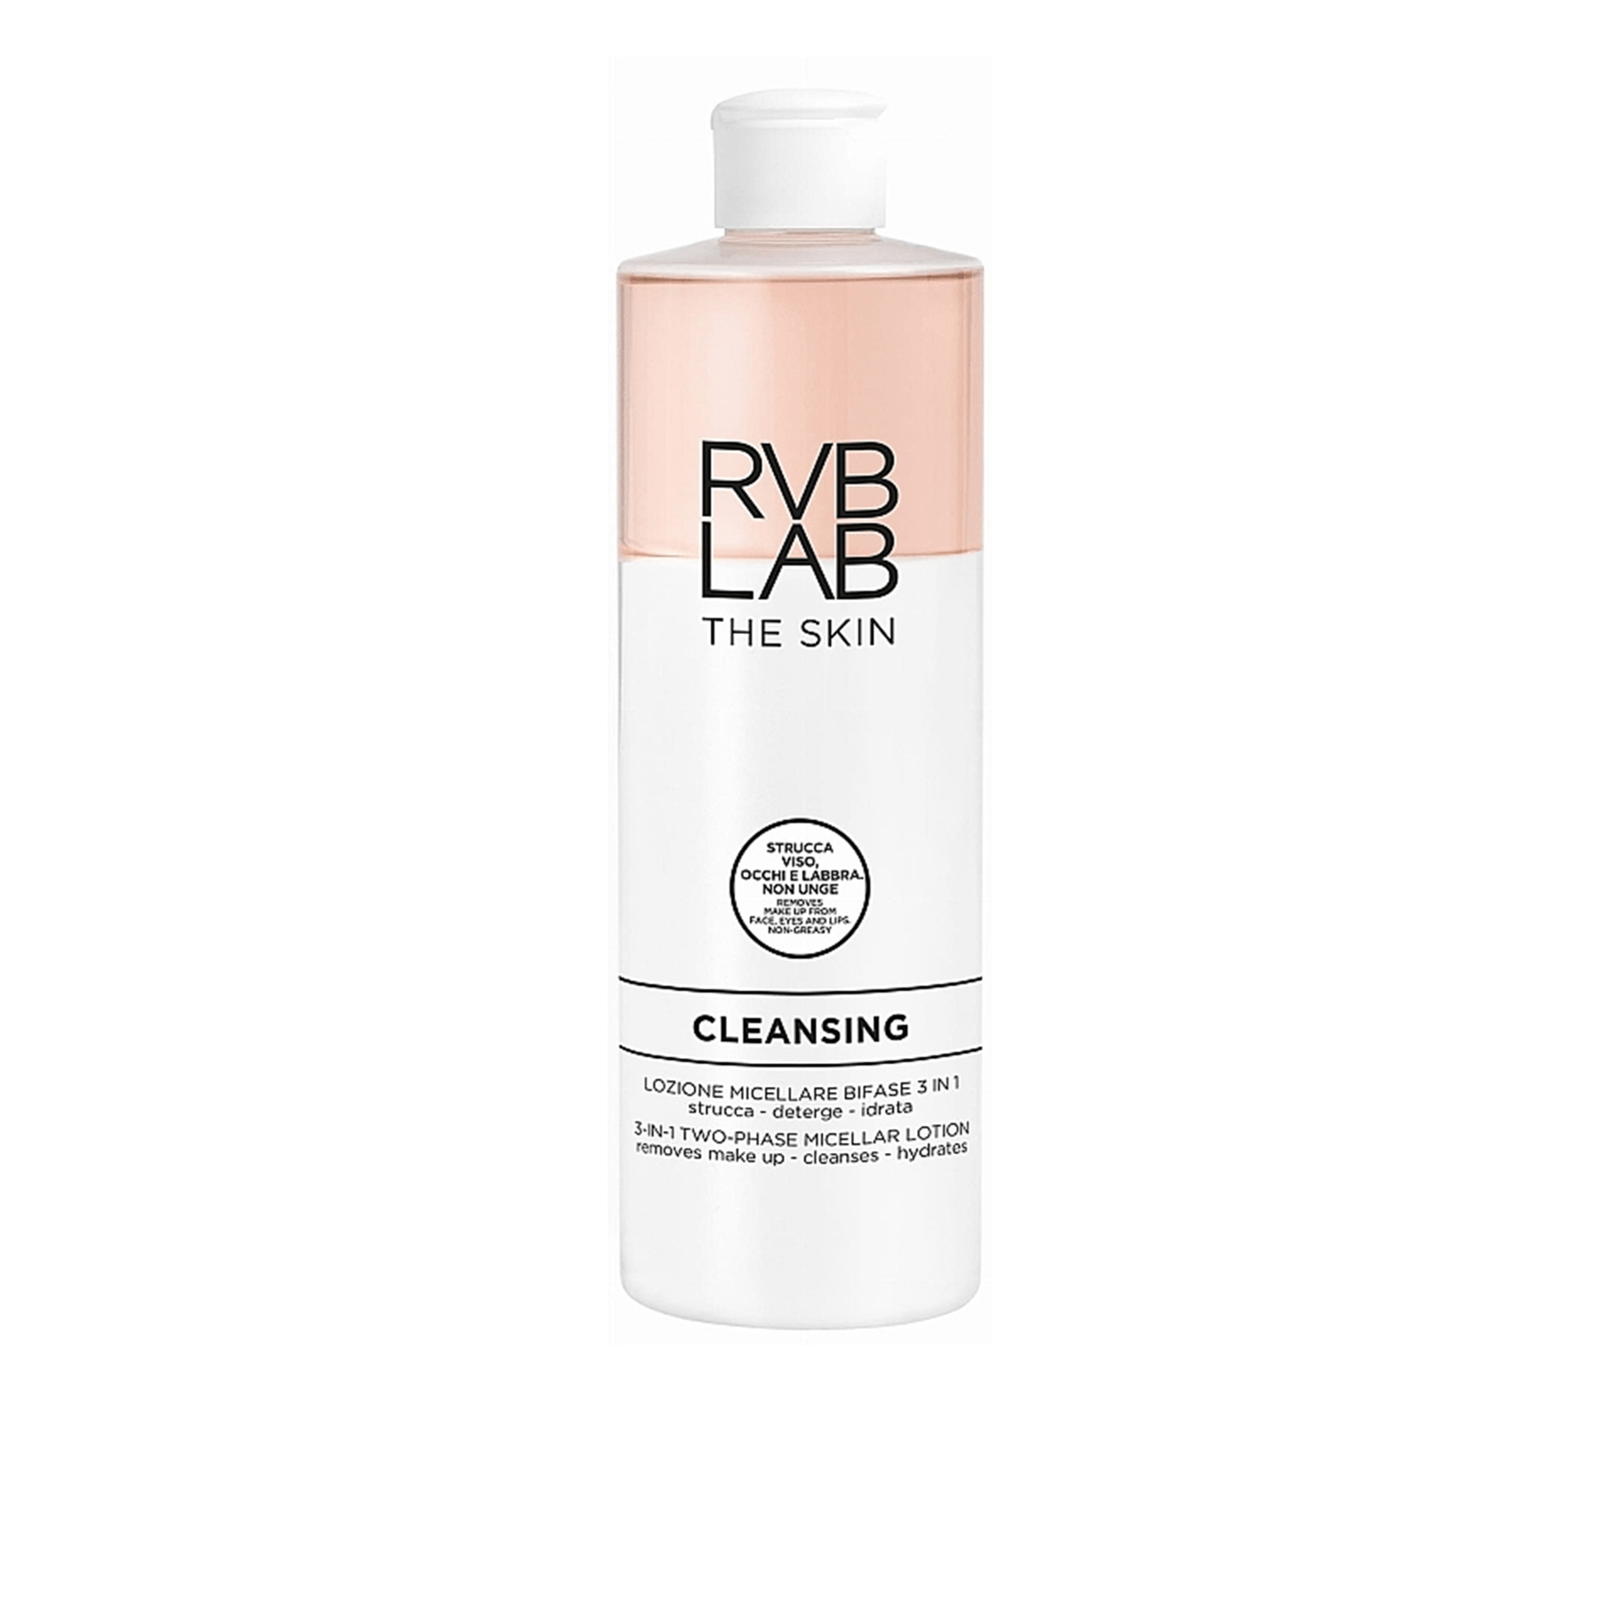 RVB LAB Cleansing 3-In-1 Two-Phase Micellar Lotion 400ml (13.5 fl oz)